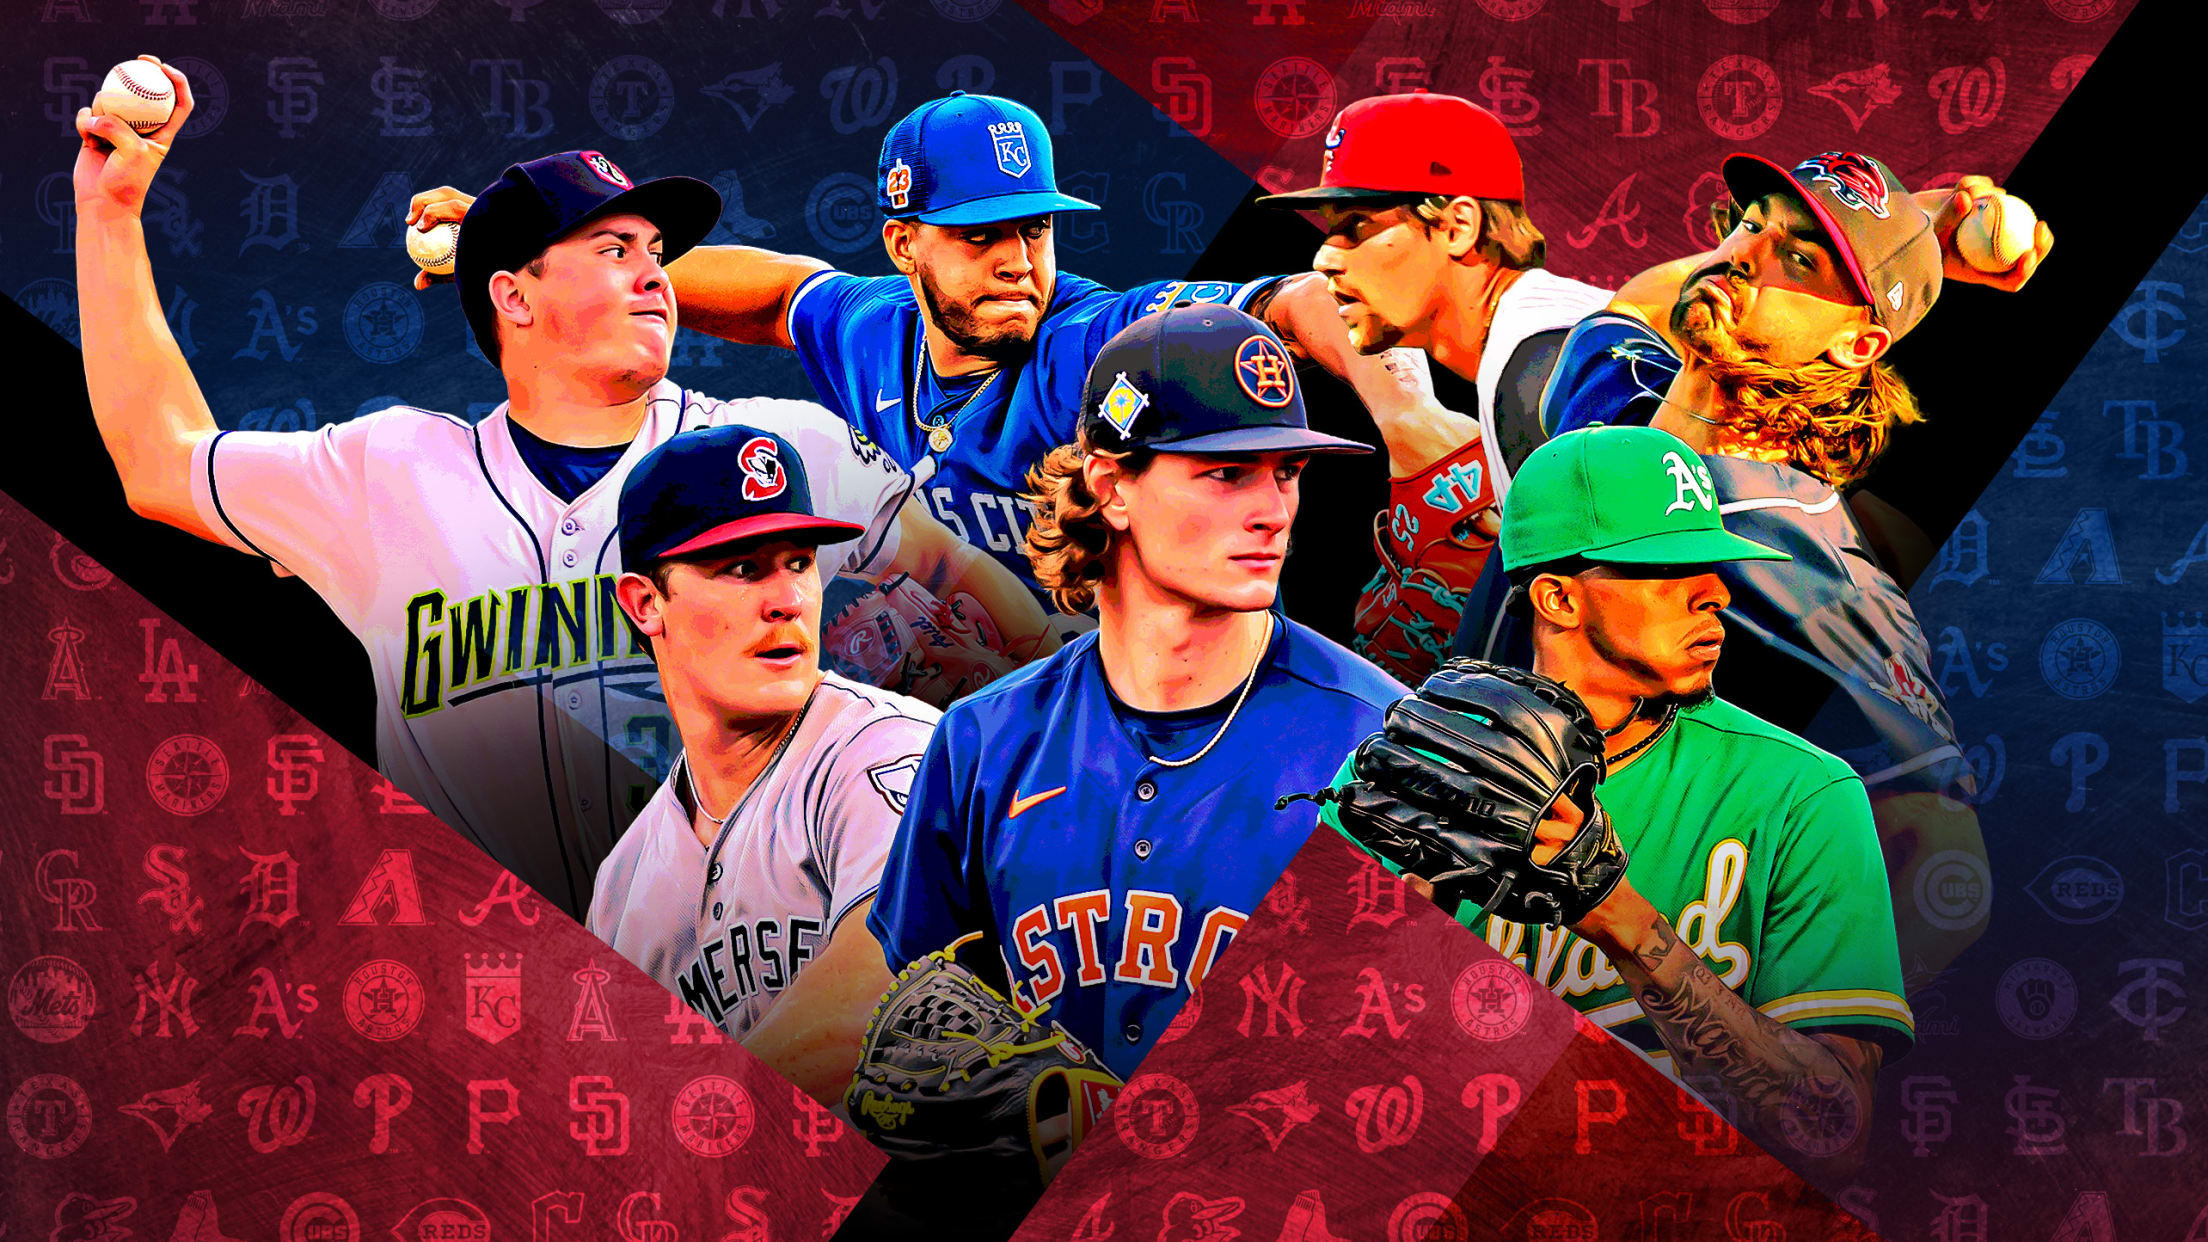 A photo illustration of seven pitchers clustered among red and blue shapes with team logos